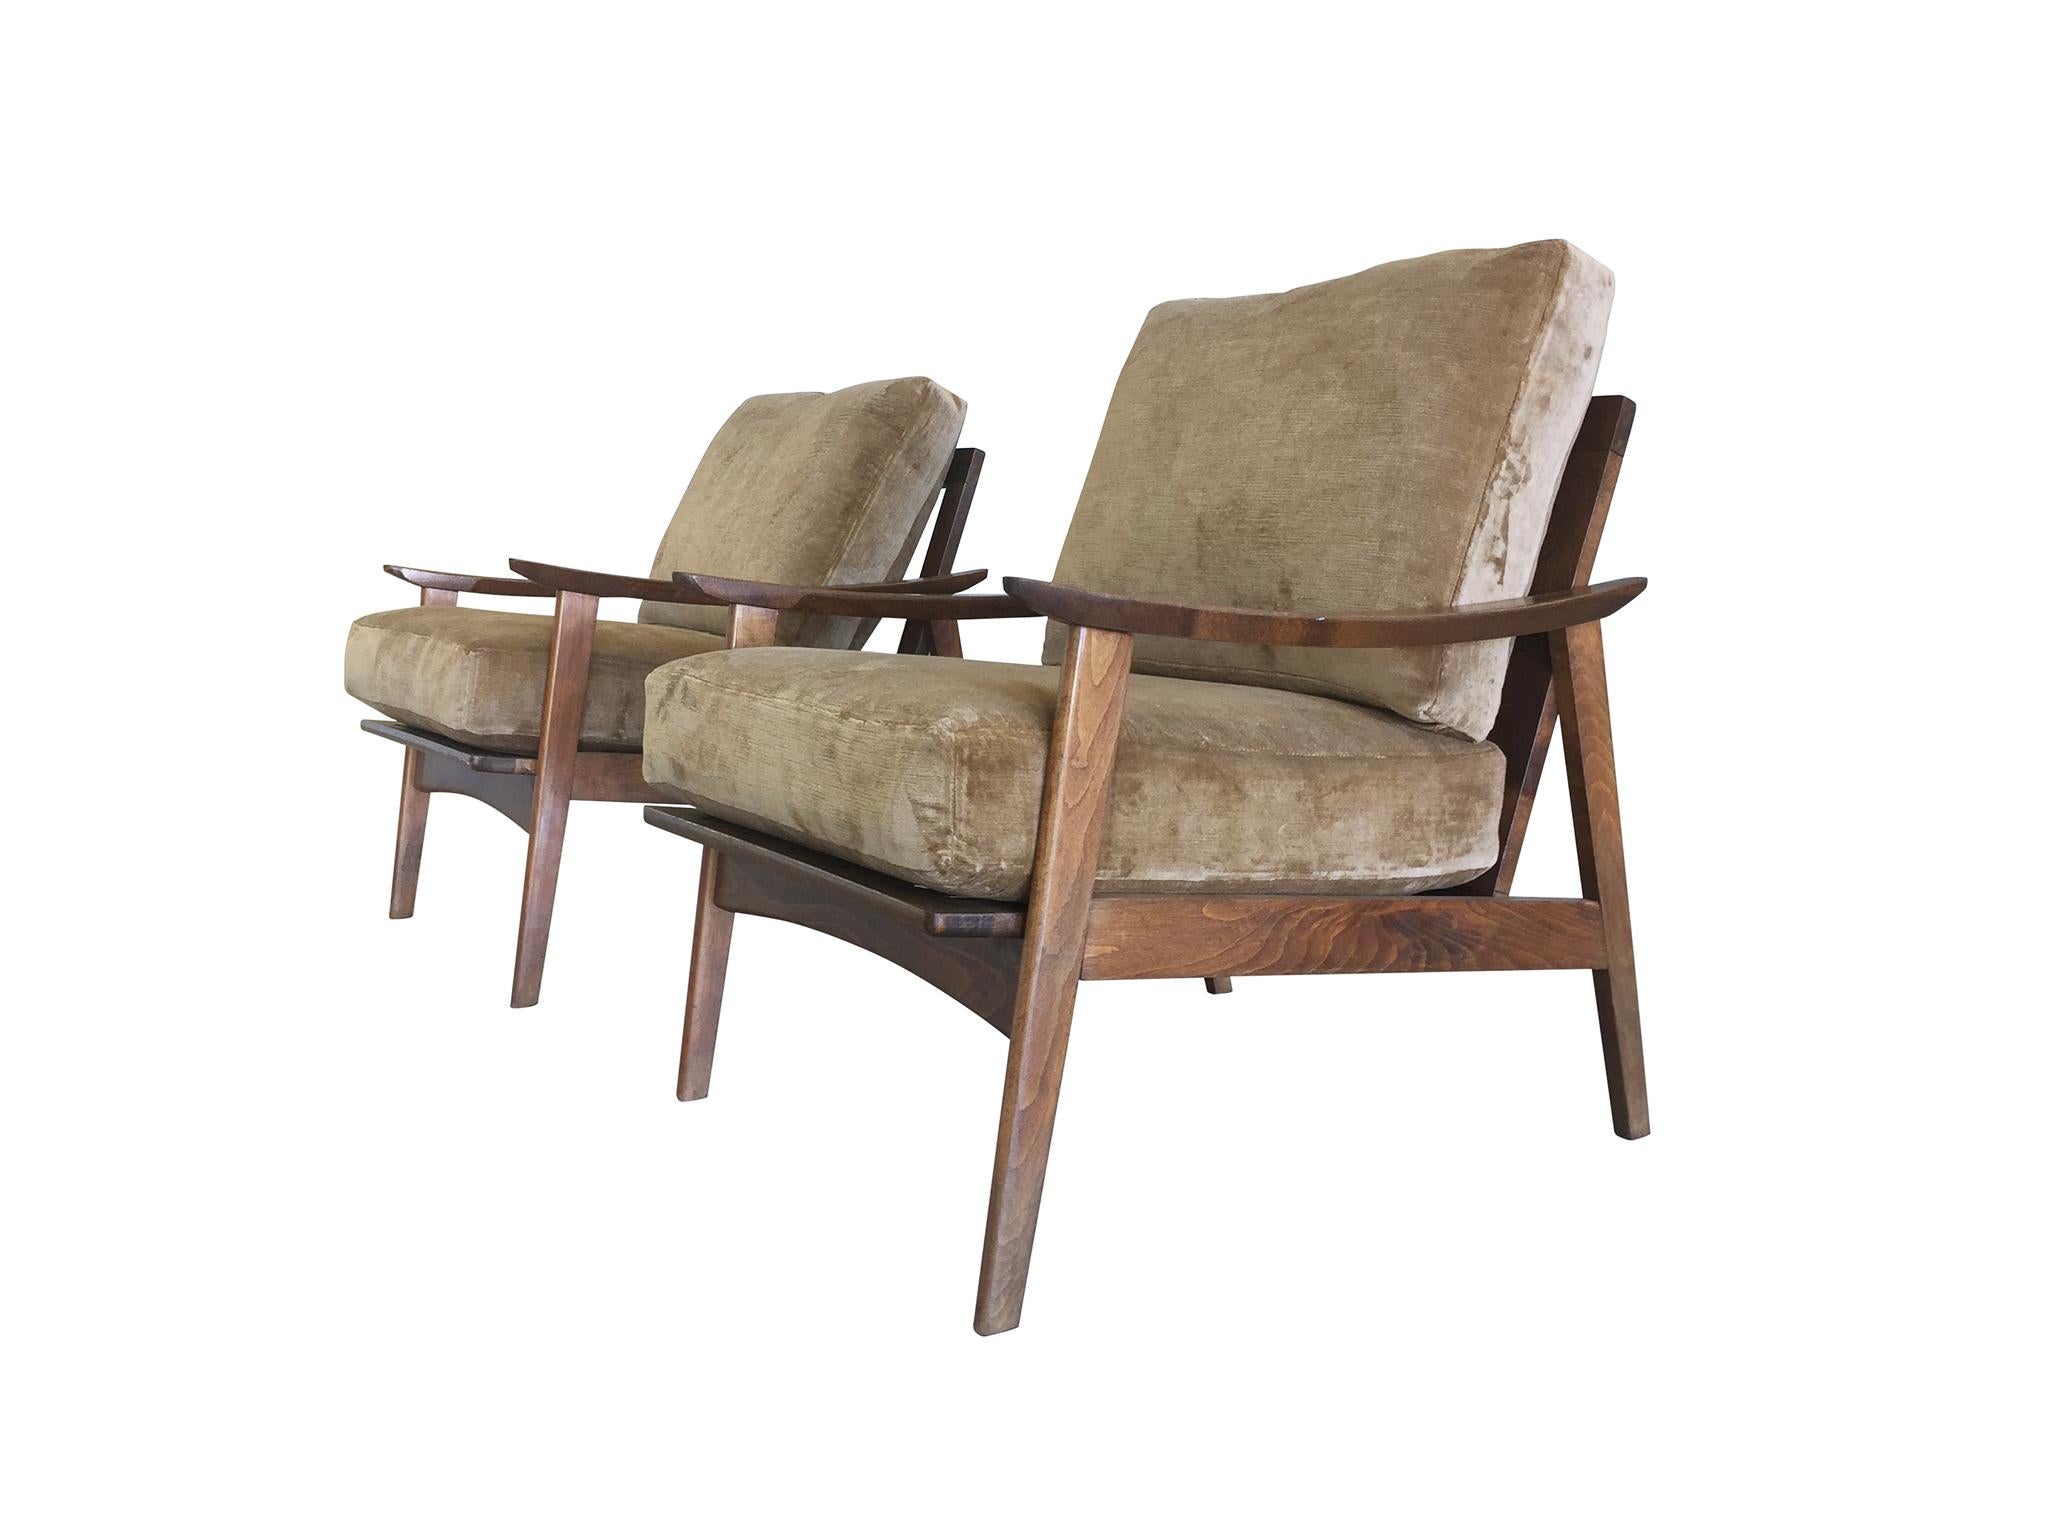 A pair of handsome lounge armchairs handmade in Denmark, mid-20th century. Their frames are maple wood crafted in a sleek, minimal design. Smooth, beautifully rounded edges characterize their modern style, as do the slanted legs that give the frame